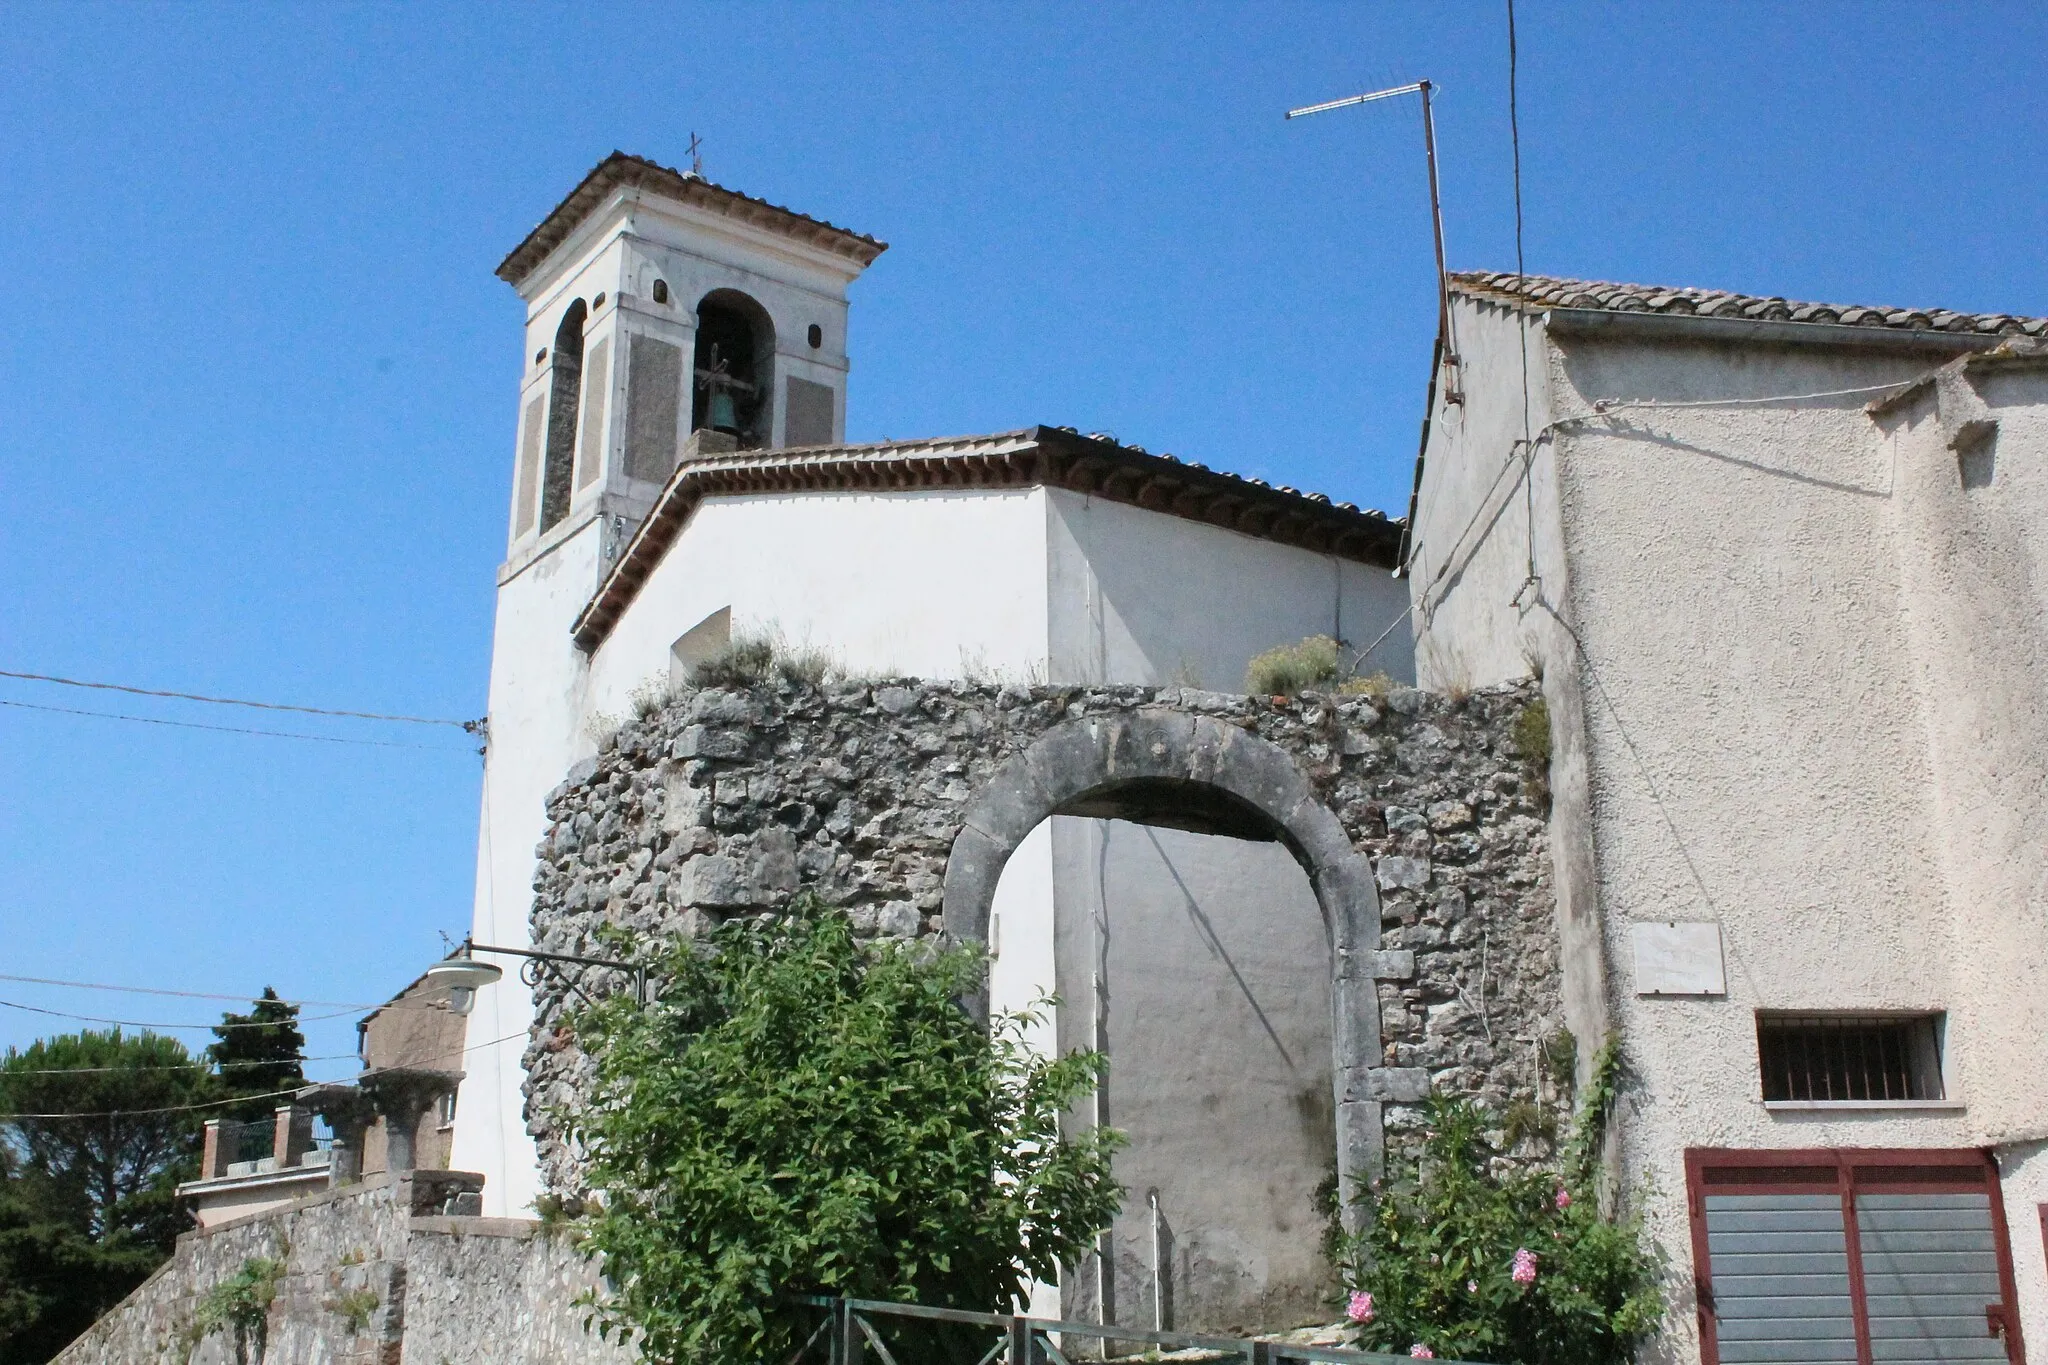 Photo showing: Church San Gregorio in Foce, hamlet of Amelia, Province of Terni, Umbria, Italy